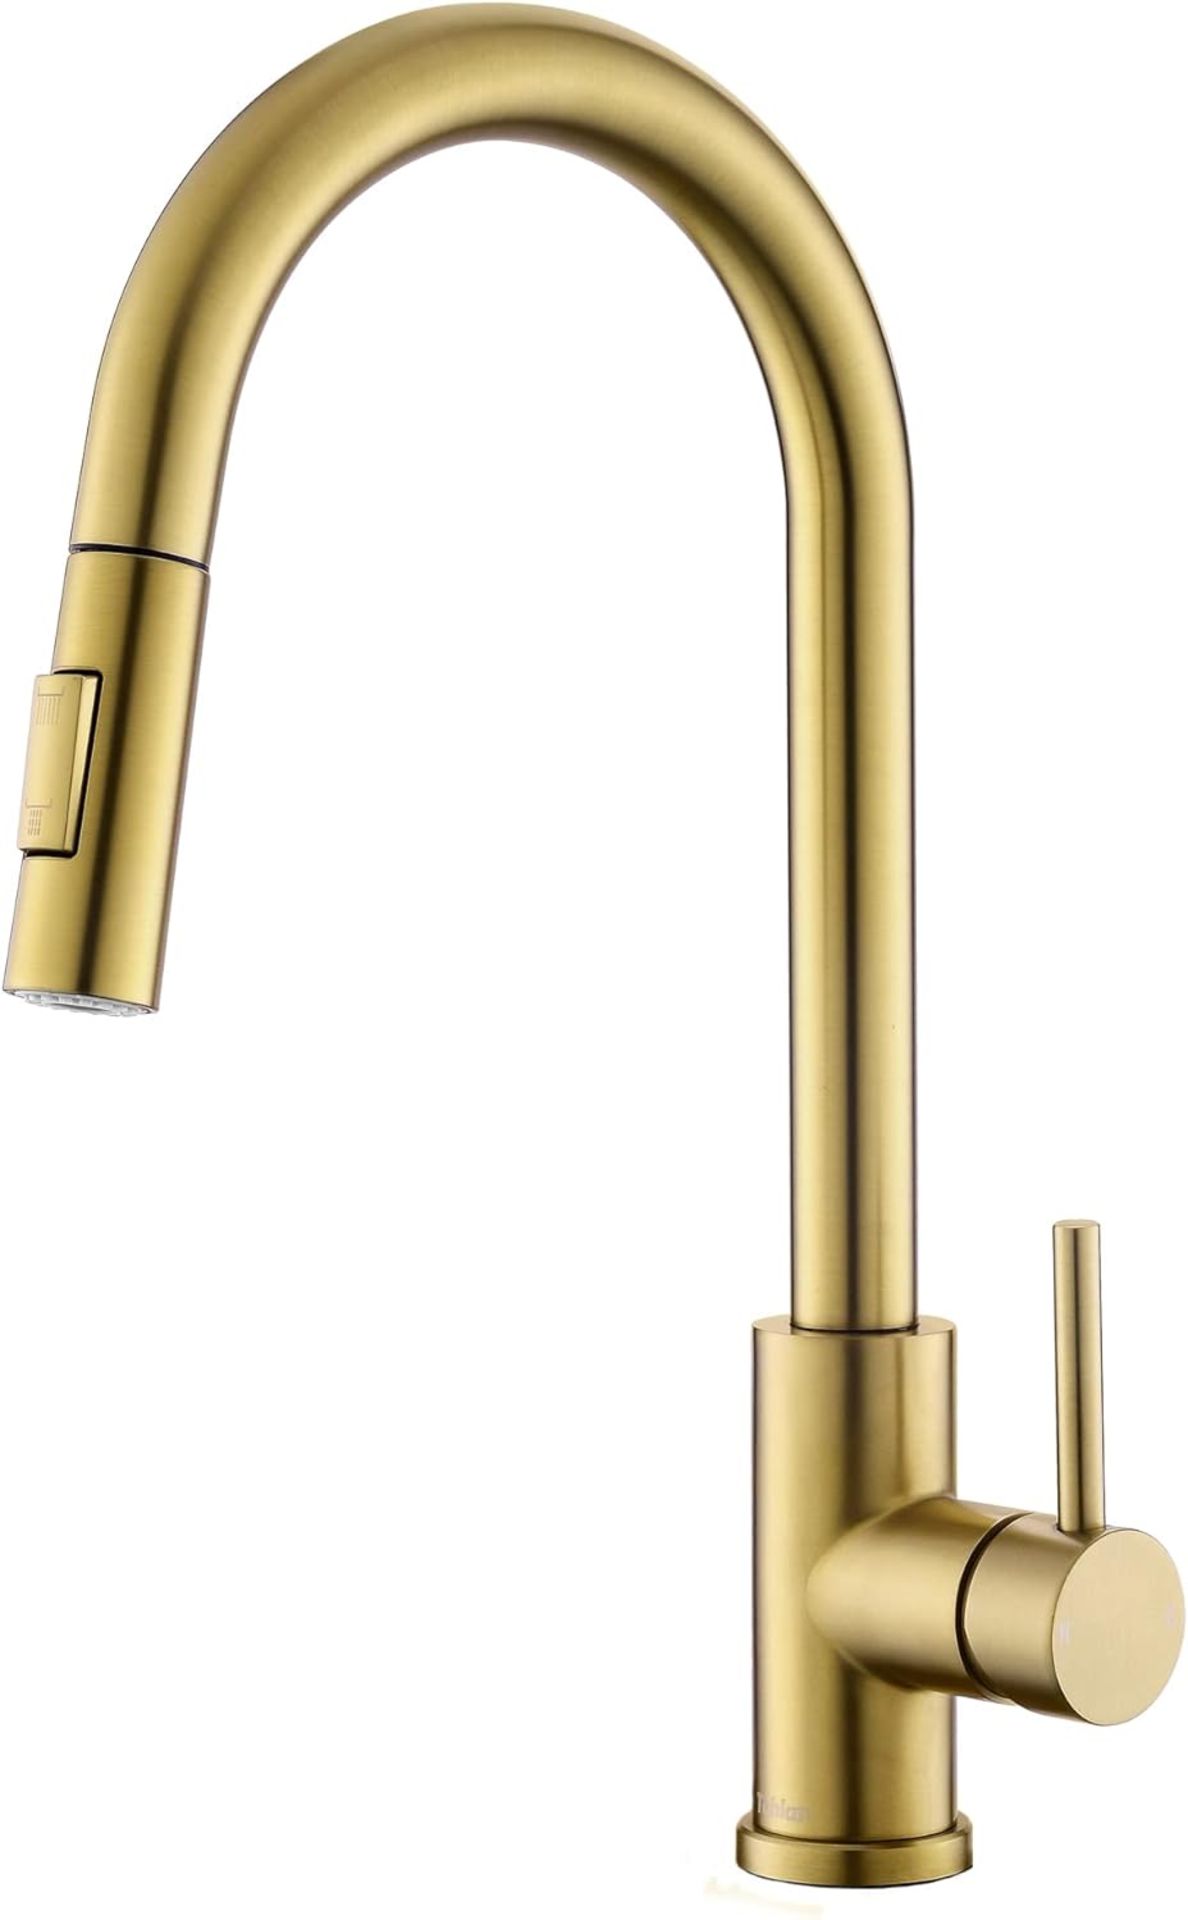 RRP £65.99 Tohlar Gold Kitchen Tap with Pull Down Sprayer, Modern Stainless Steel Single Handle Pull